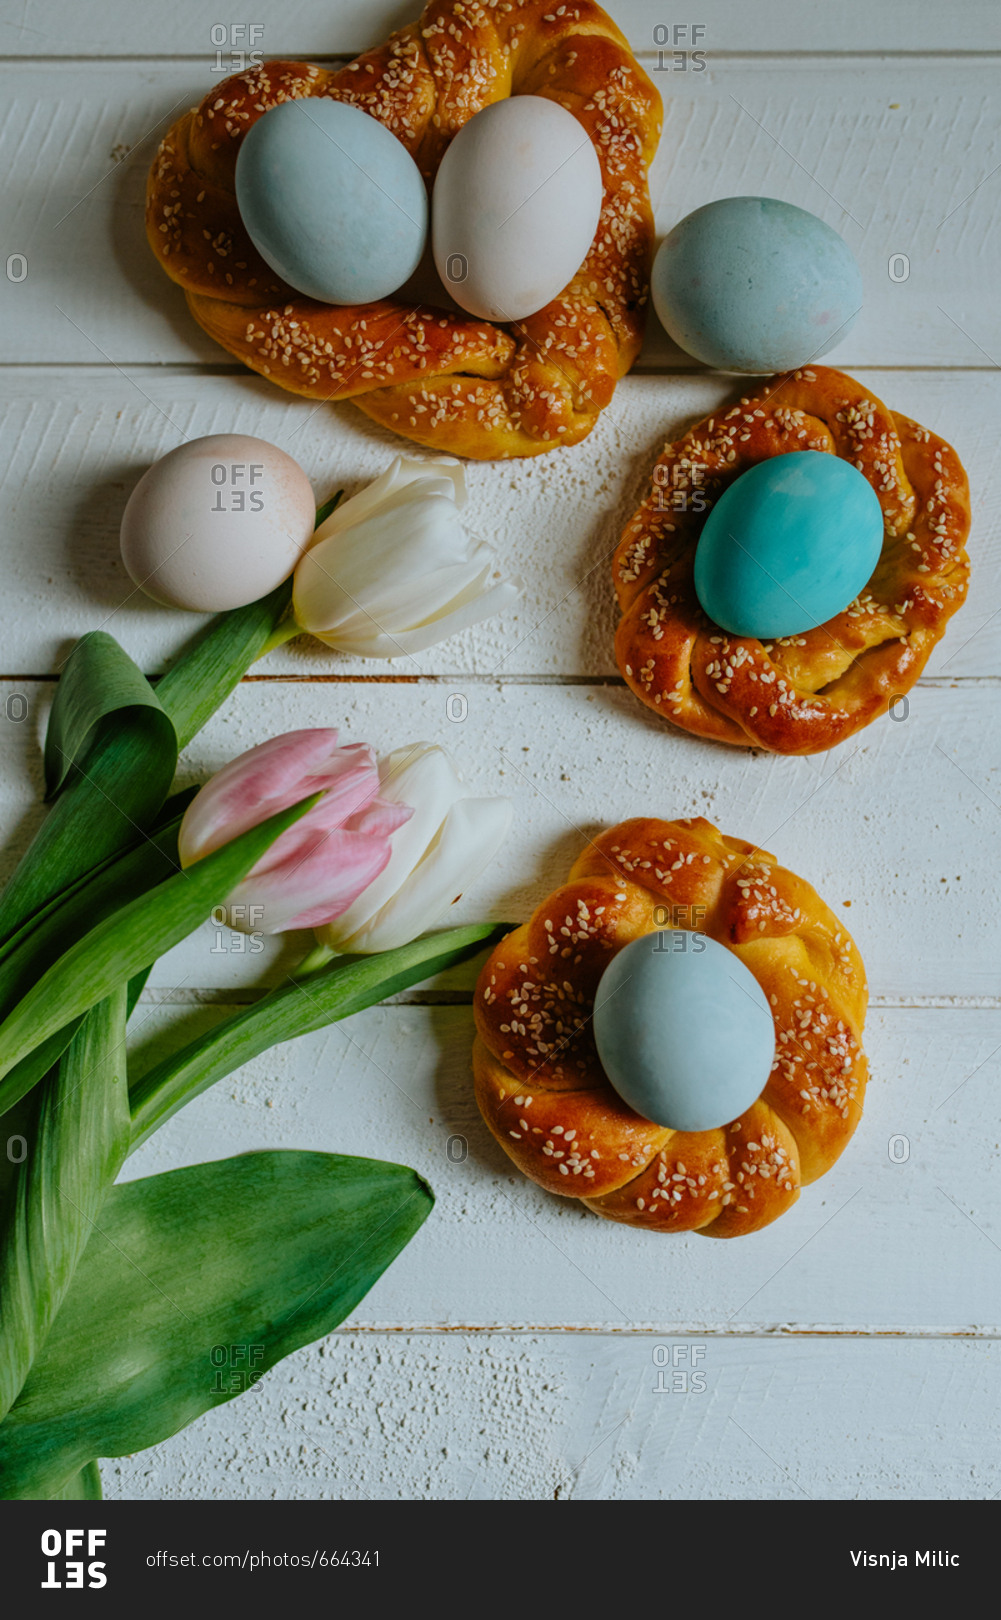 Pastel Easter eggs in braided pastry with tulips next to them